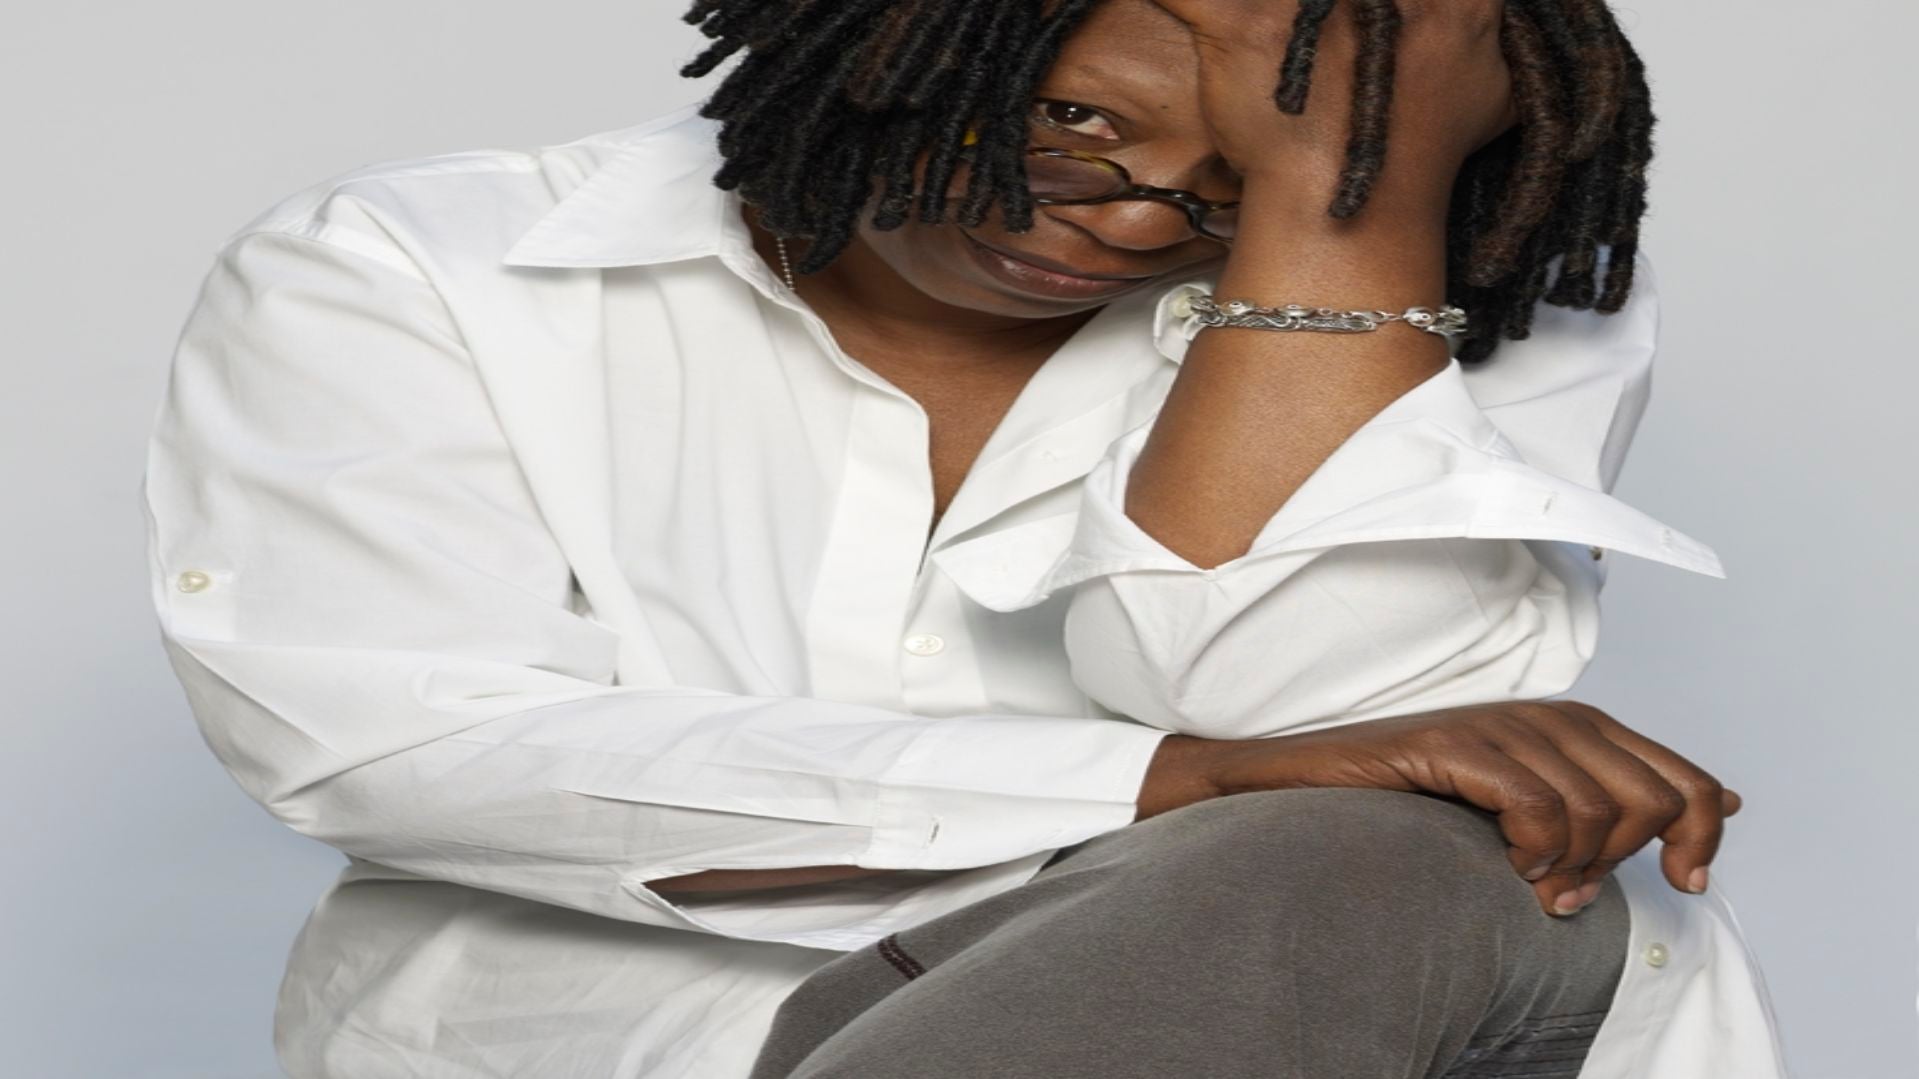 Whoopi Goldberg Is Pioneering A New Fashion Standard With Her Line DUBGEE